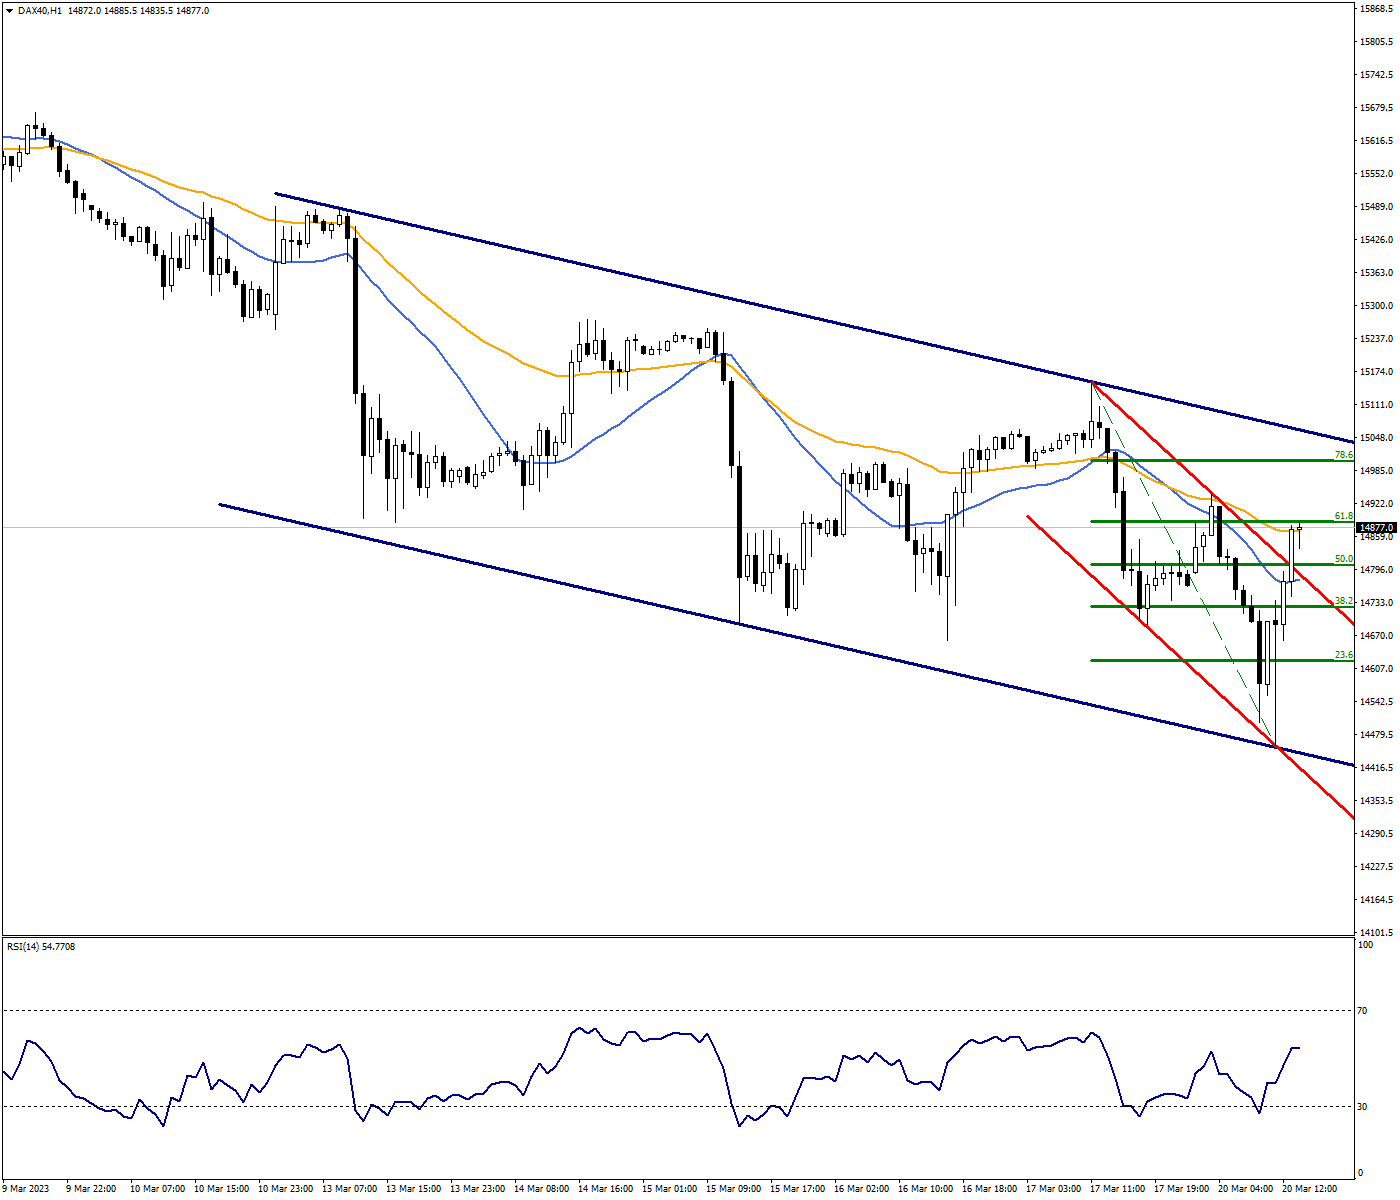 DAX40 Index Rebounds in Downward Channel